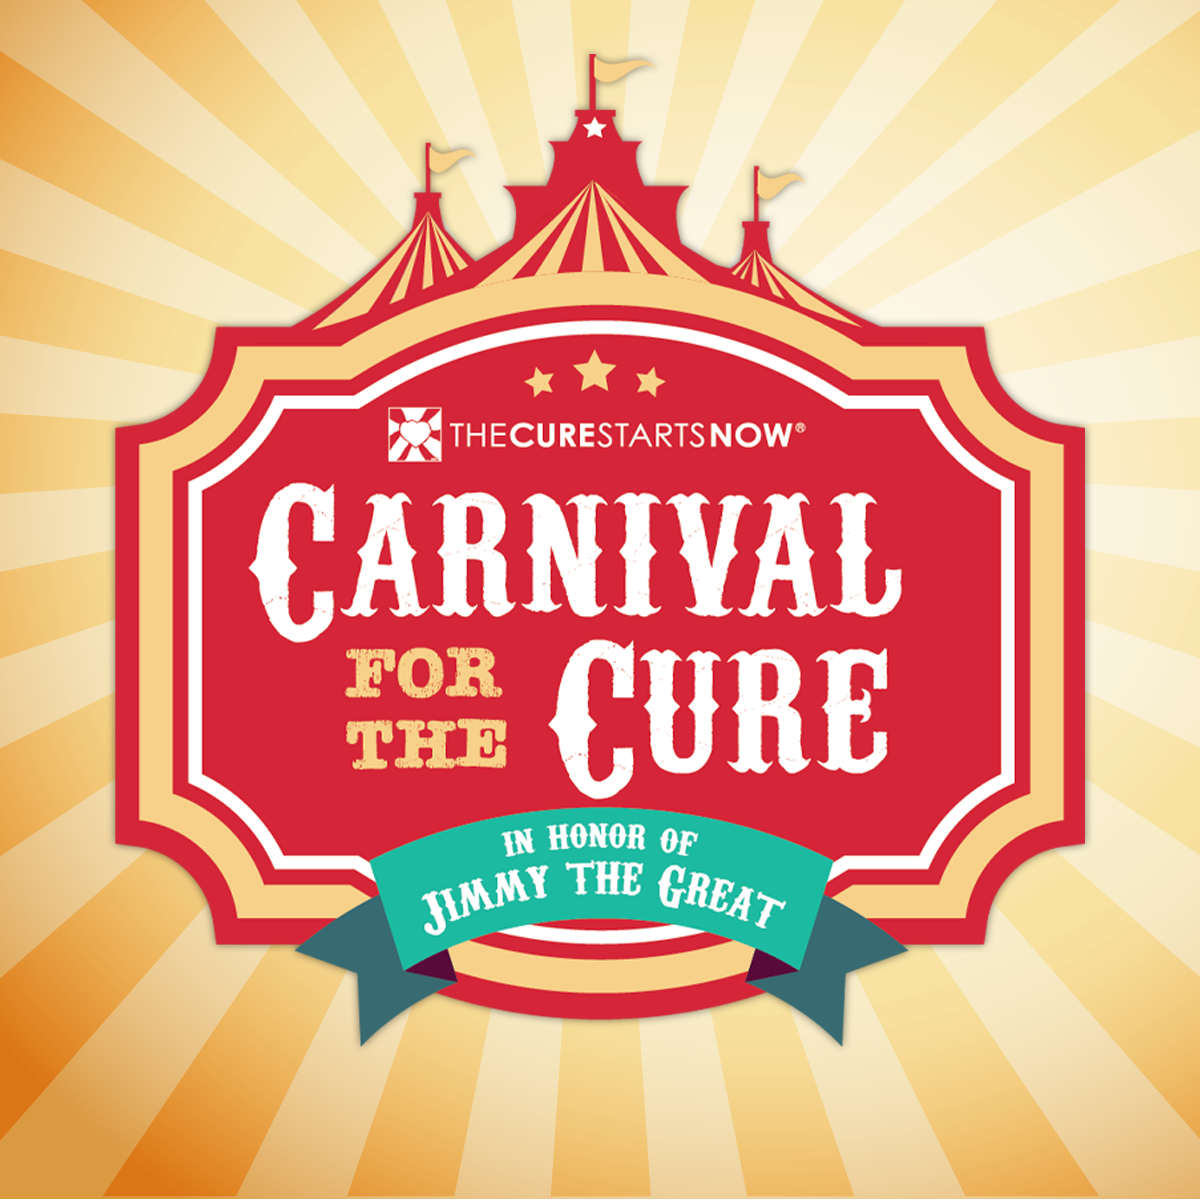 jimmy the Great's Carnival for the Cure